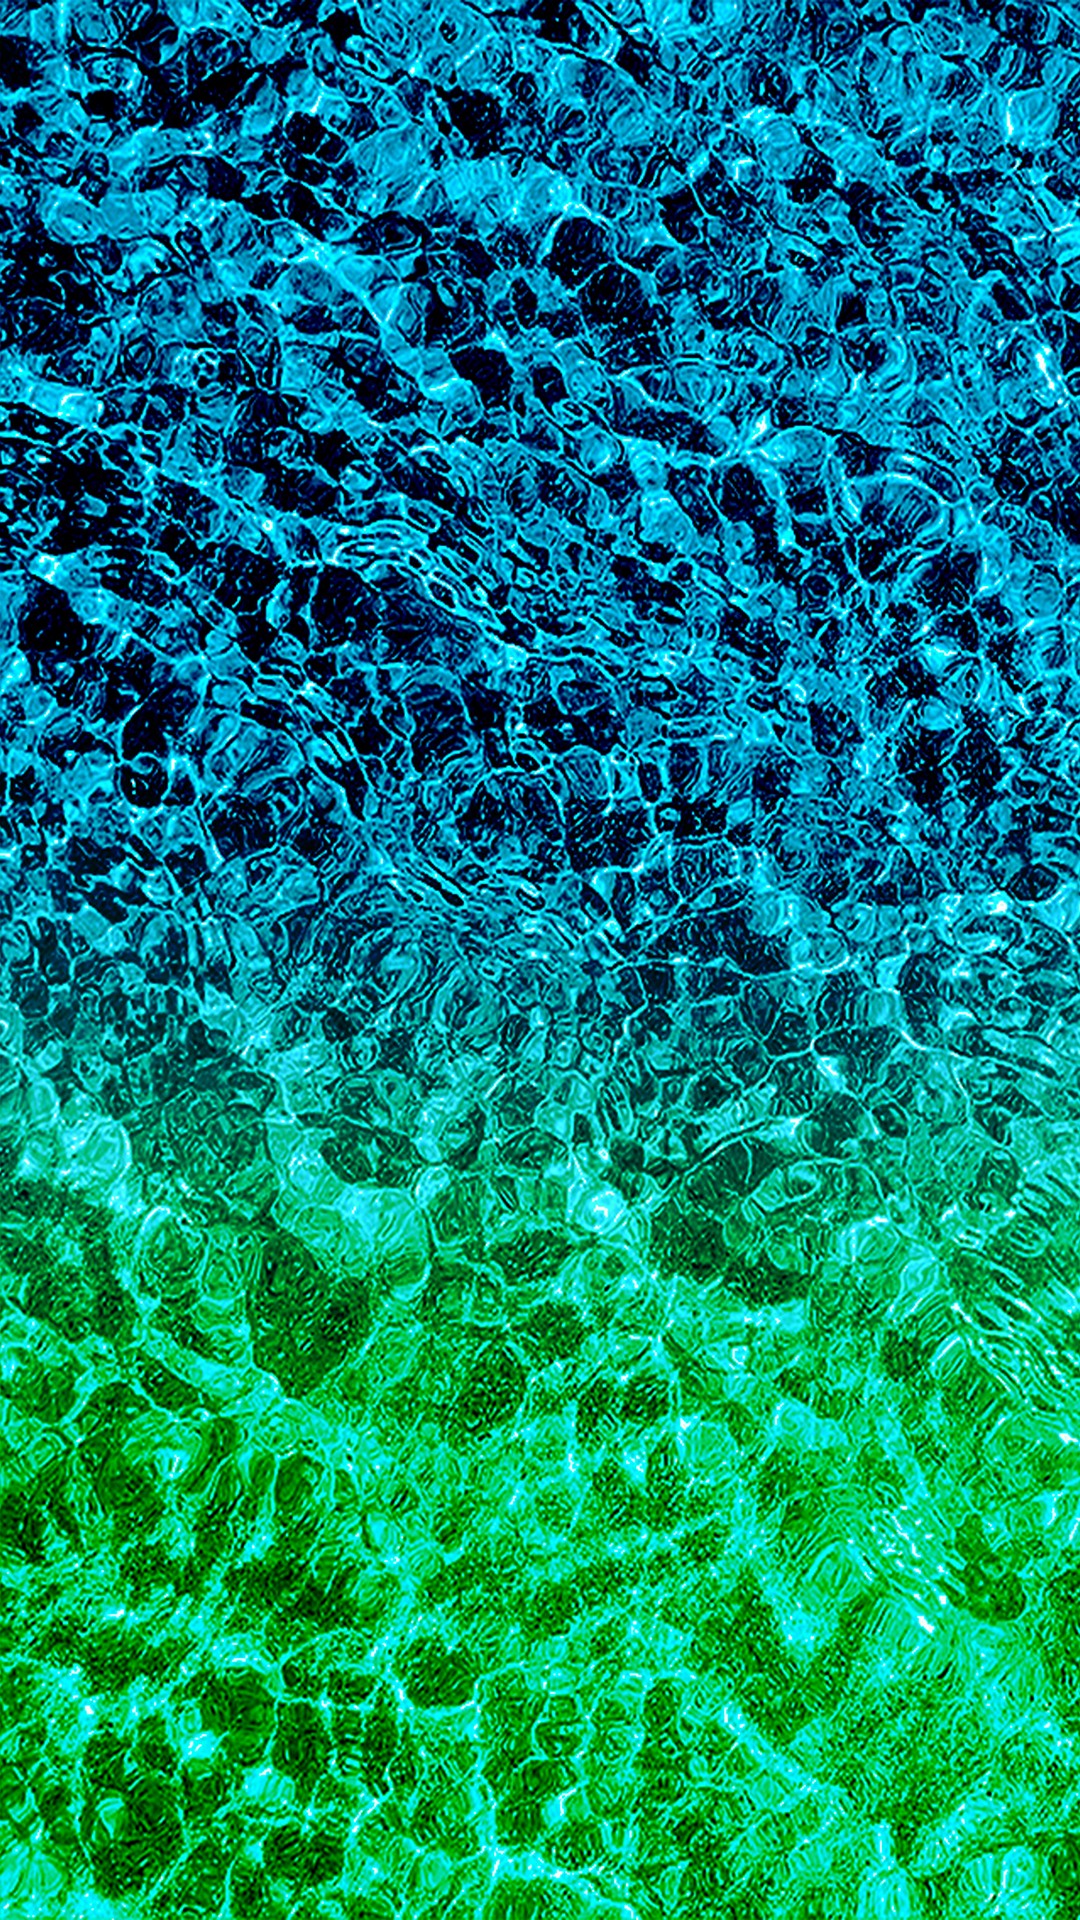 Teal Green Backgrounds For Android with image resolution 1080x1920 pixel. You can make this wallpaper for your Android backgrounds, Tablet, Smartphones Screensavers and Mobile Phone Lock Screen